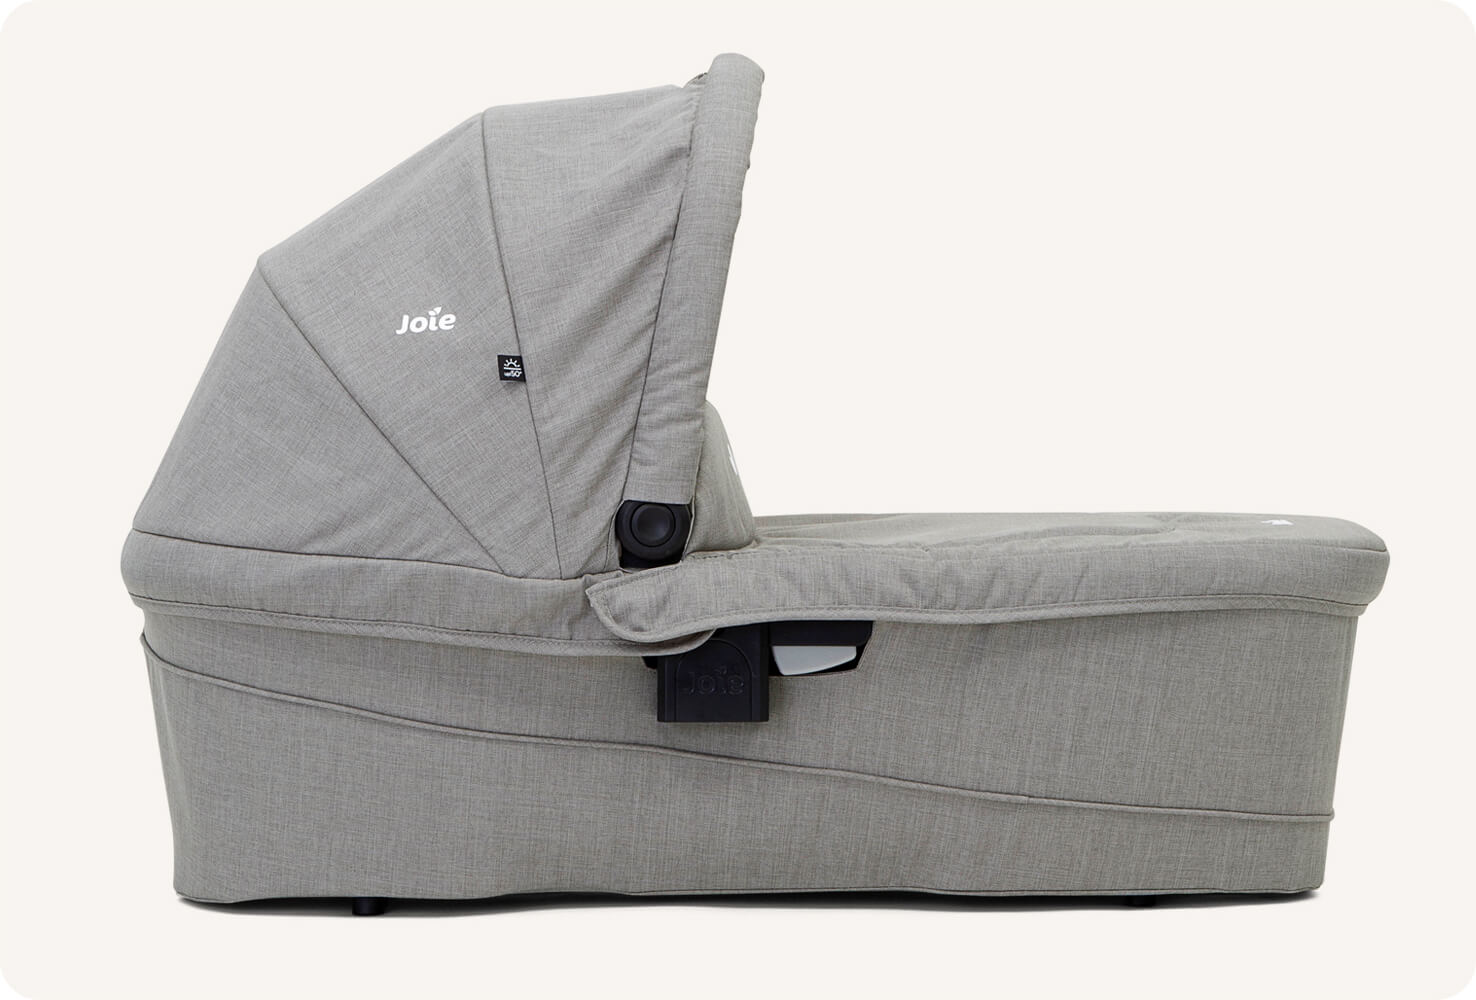  Joie Ramble xl carry cot in light gray on side angle. 